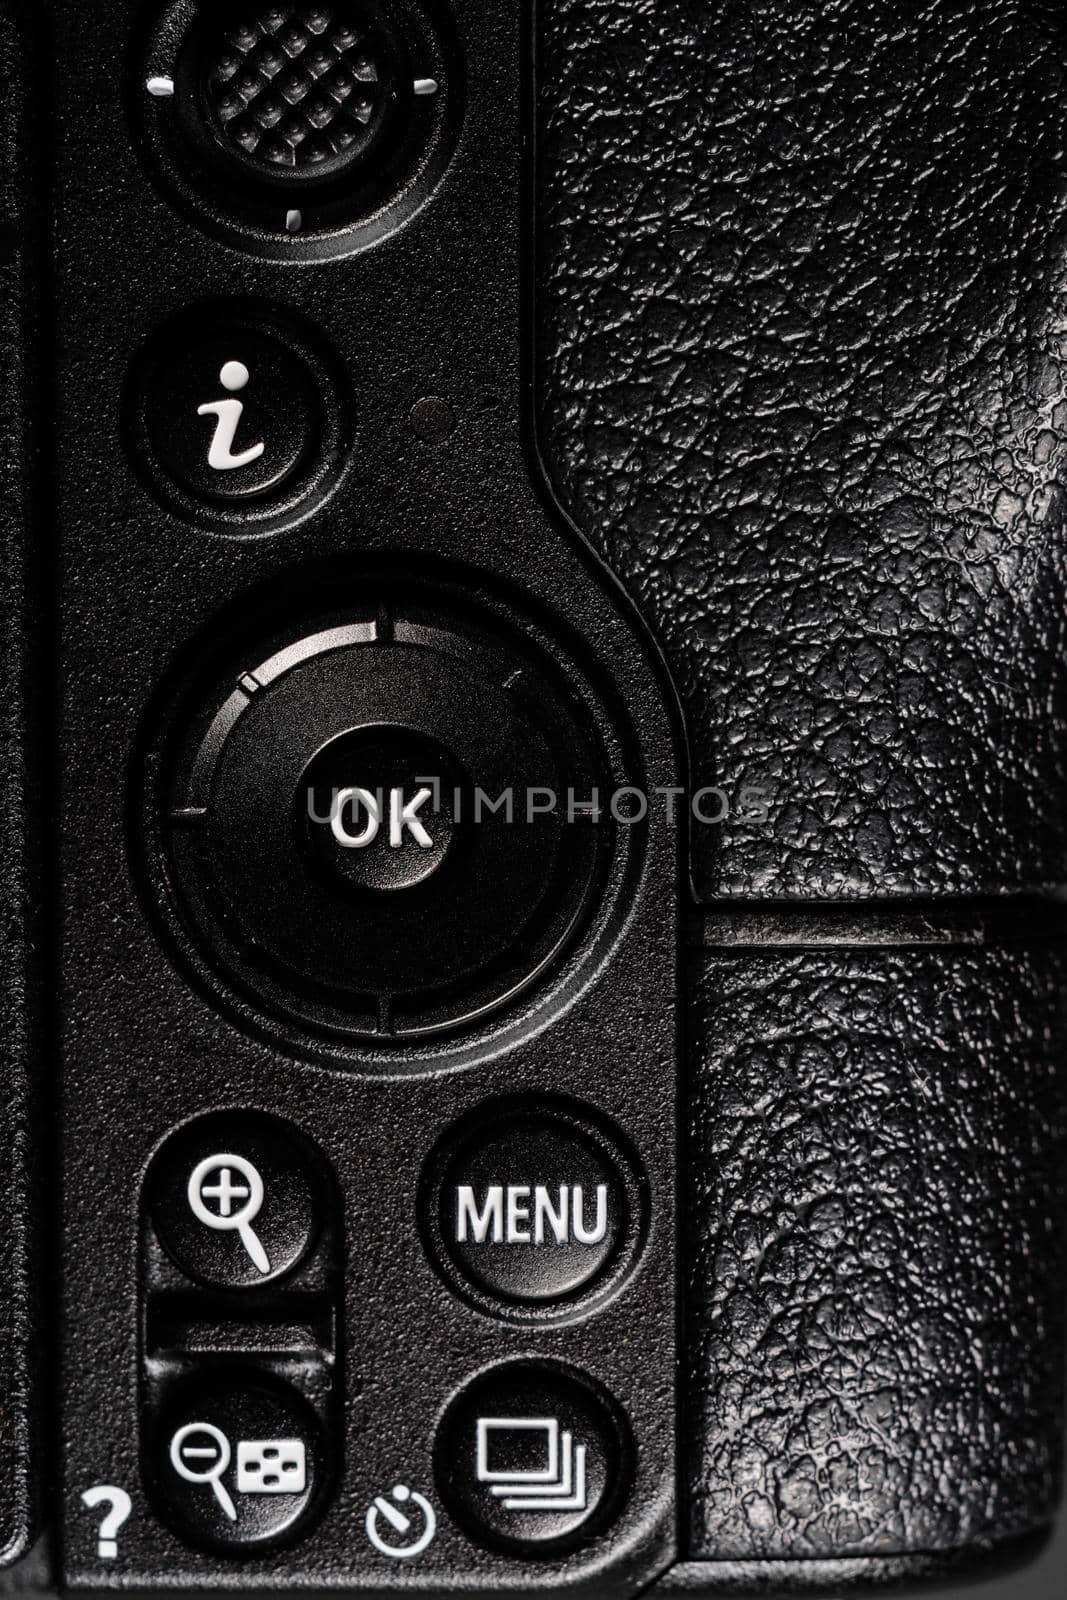 Menu button and other mirrorless camera control buttons 2021.